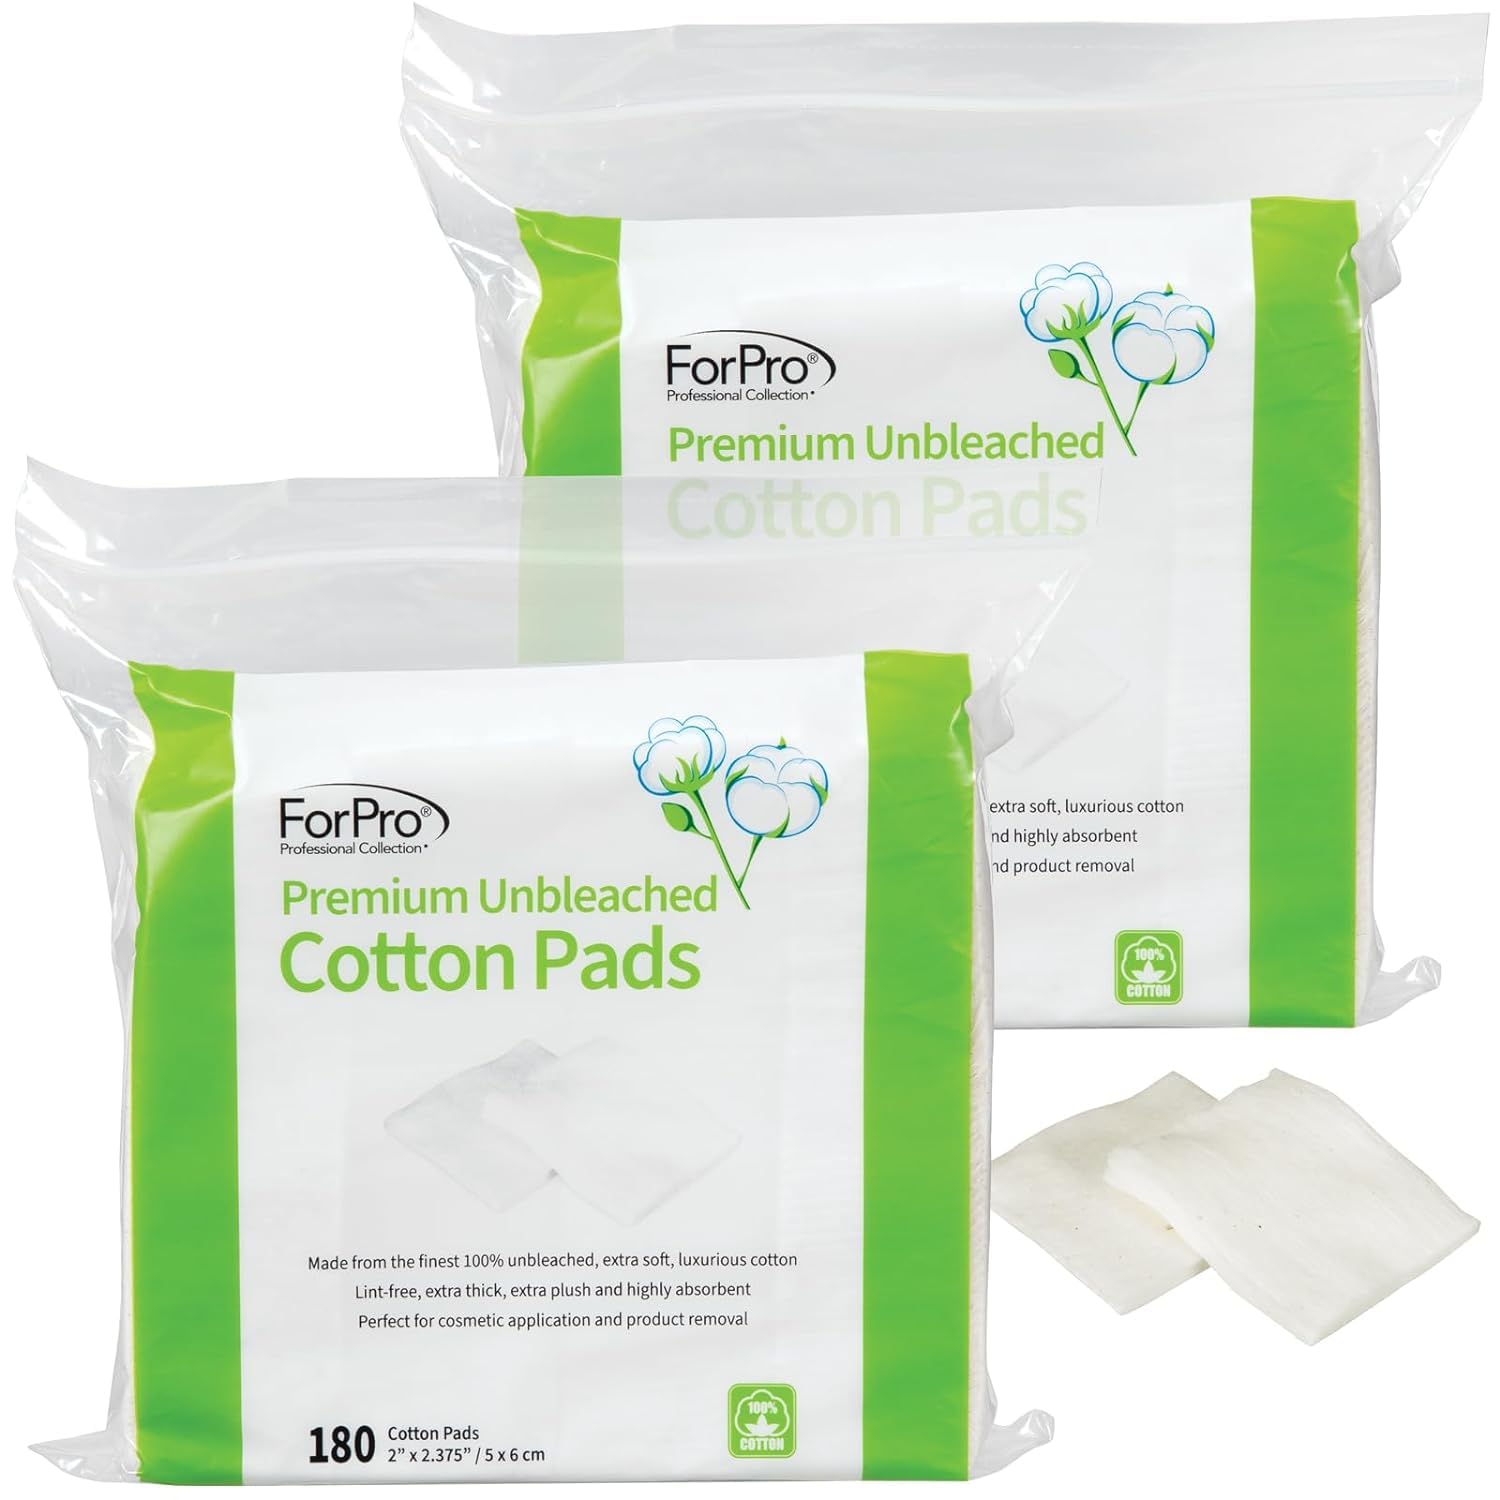 ForPro Premium Unbleached Cotton Pads (360-Count), 100% Unbleached Cotton Cosmetic Pads for Face, Extra Thick, Lint-Free, Vegan & Cruelty-Free, Pack of 2-180 Cotton Pads